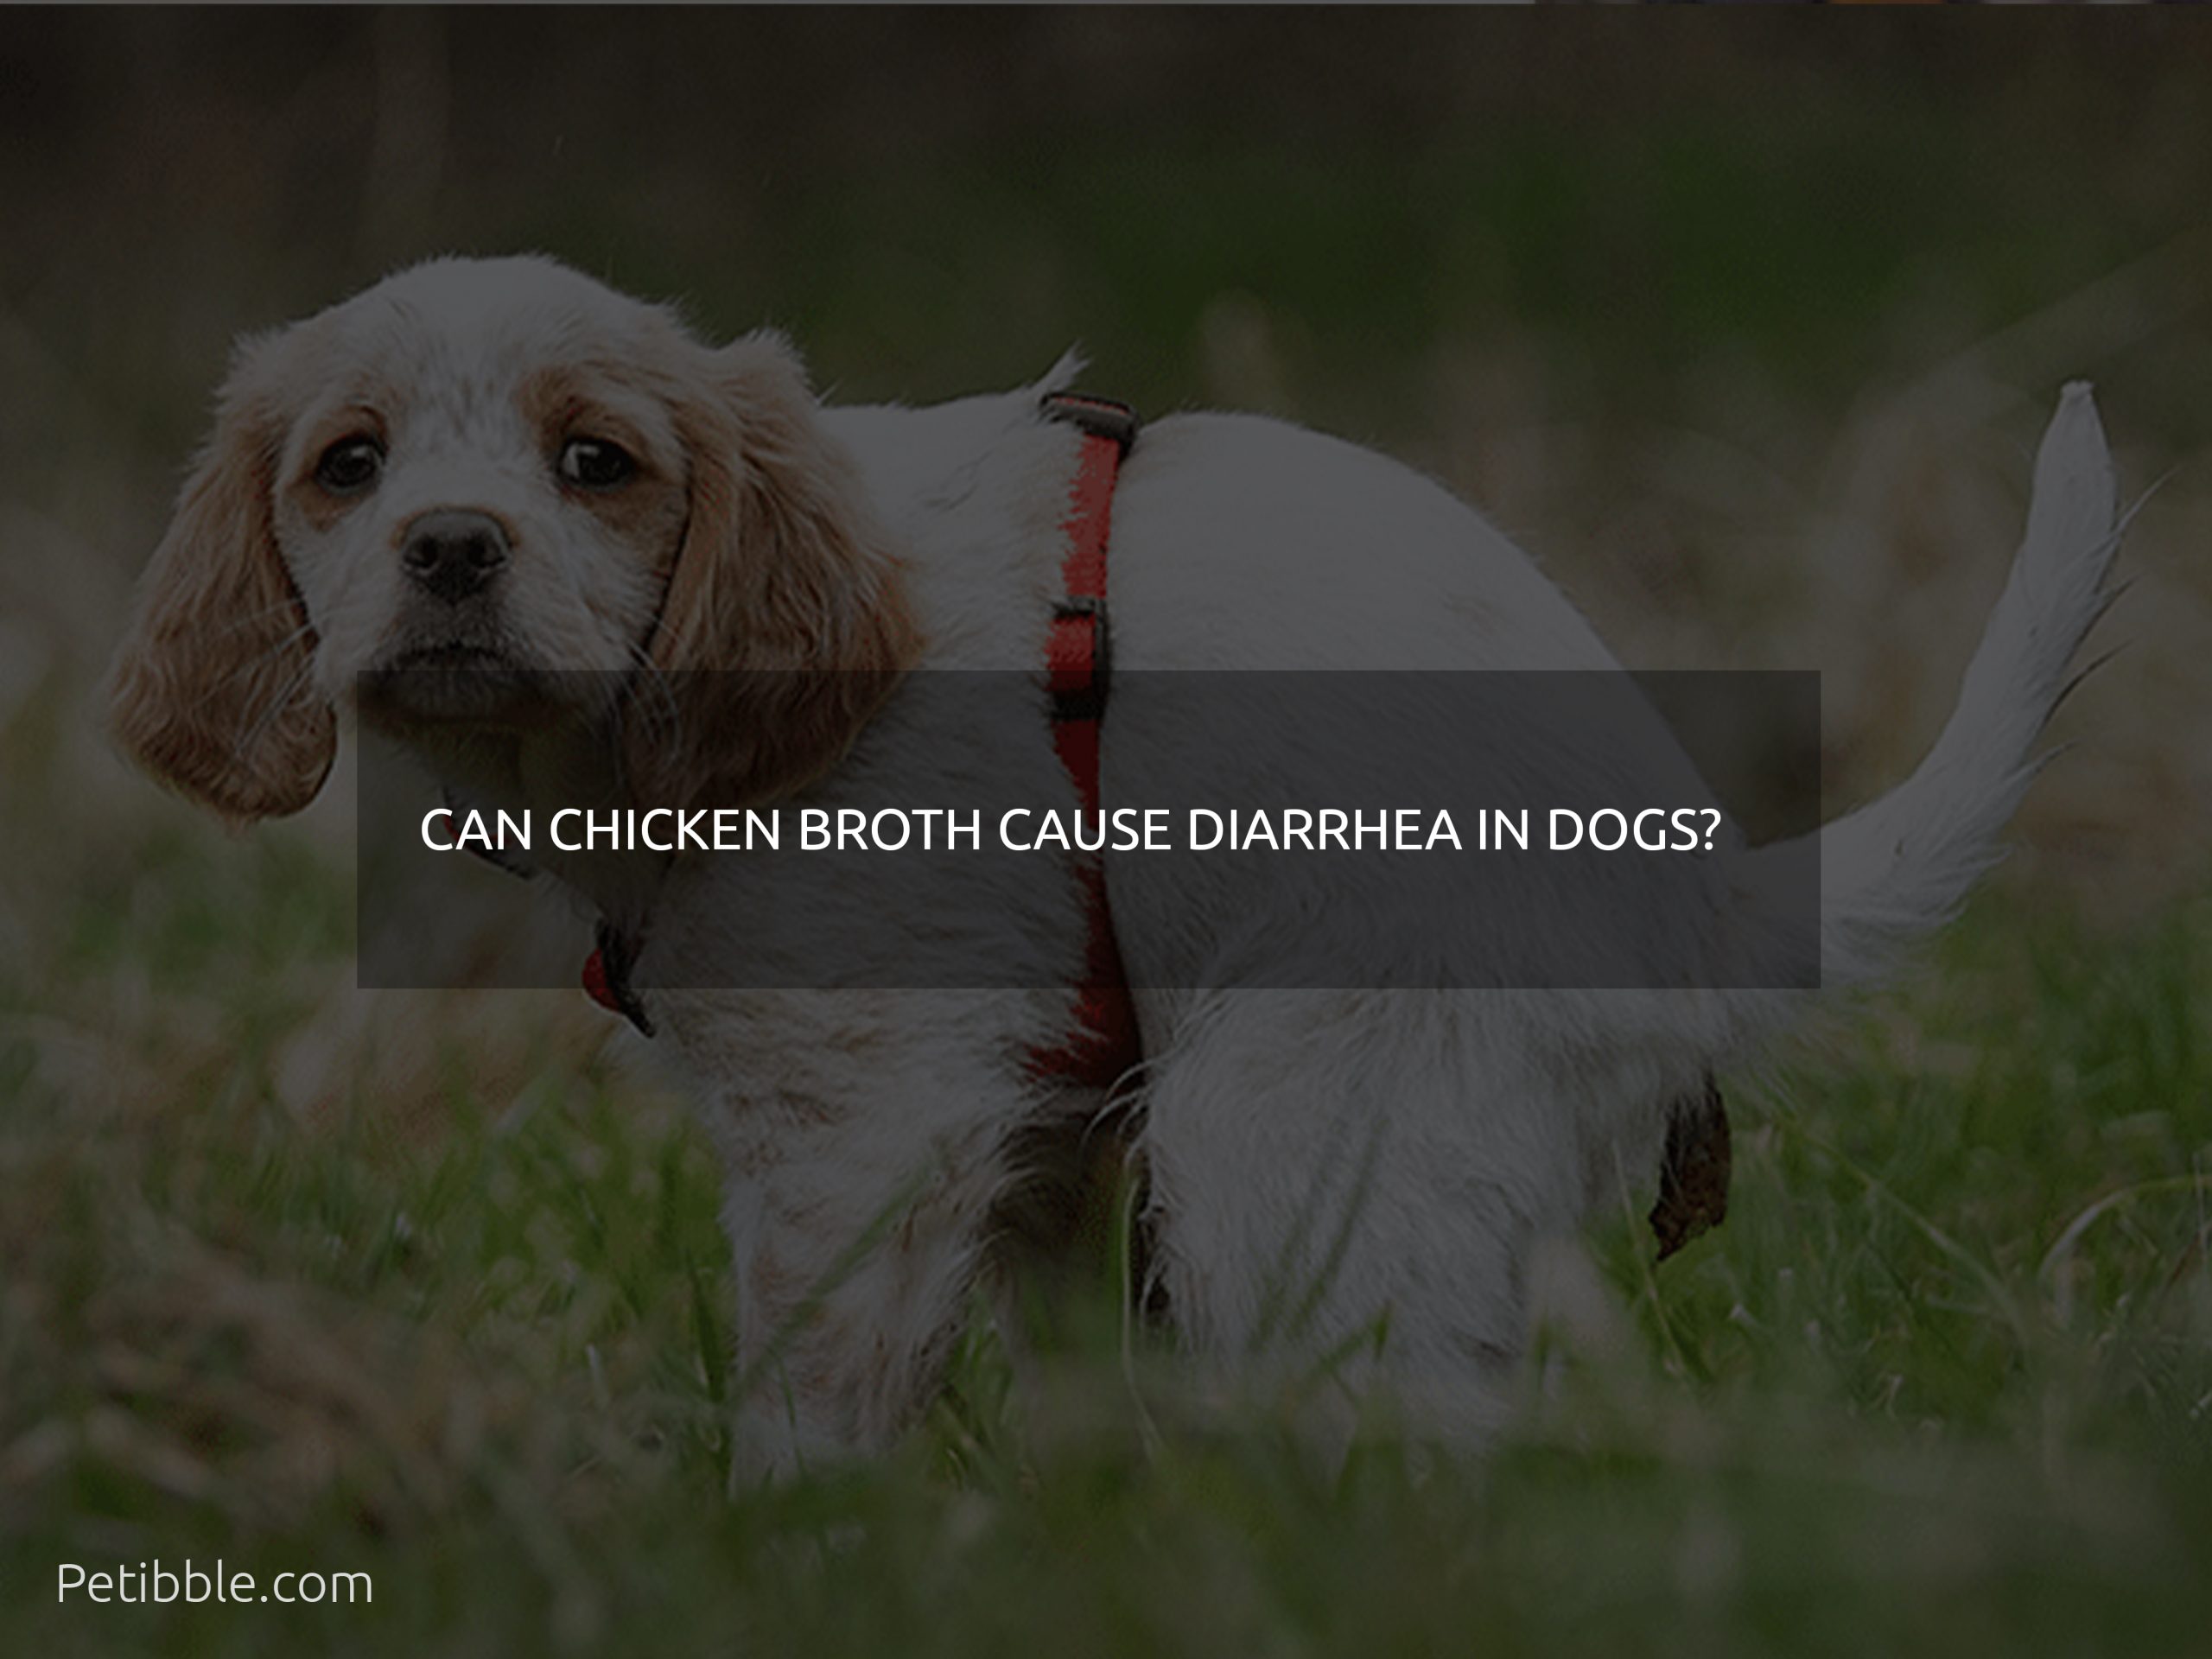 can chicken broth cause diarrhea in dogs?